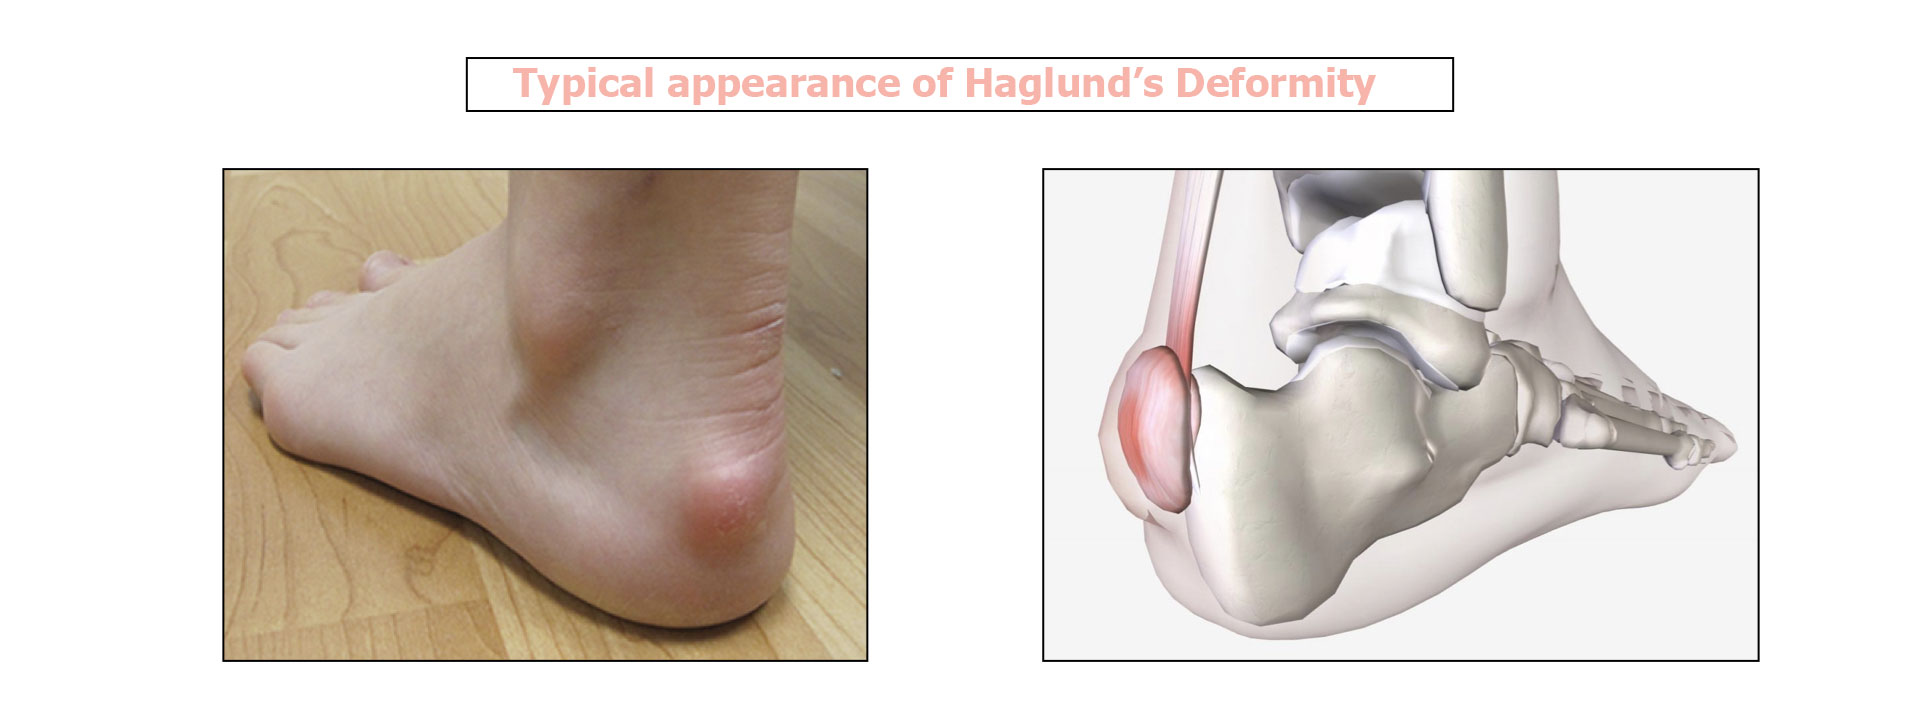 Schedule a Hammer Toe Surgery in Chicago, IL - Keyes for Toes